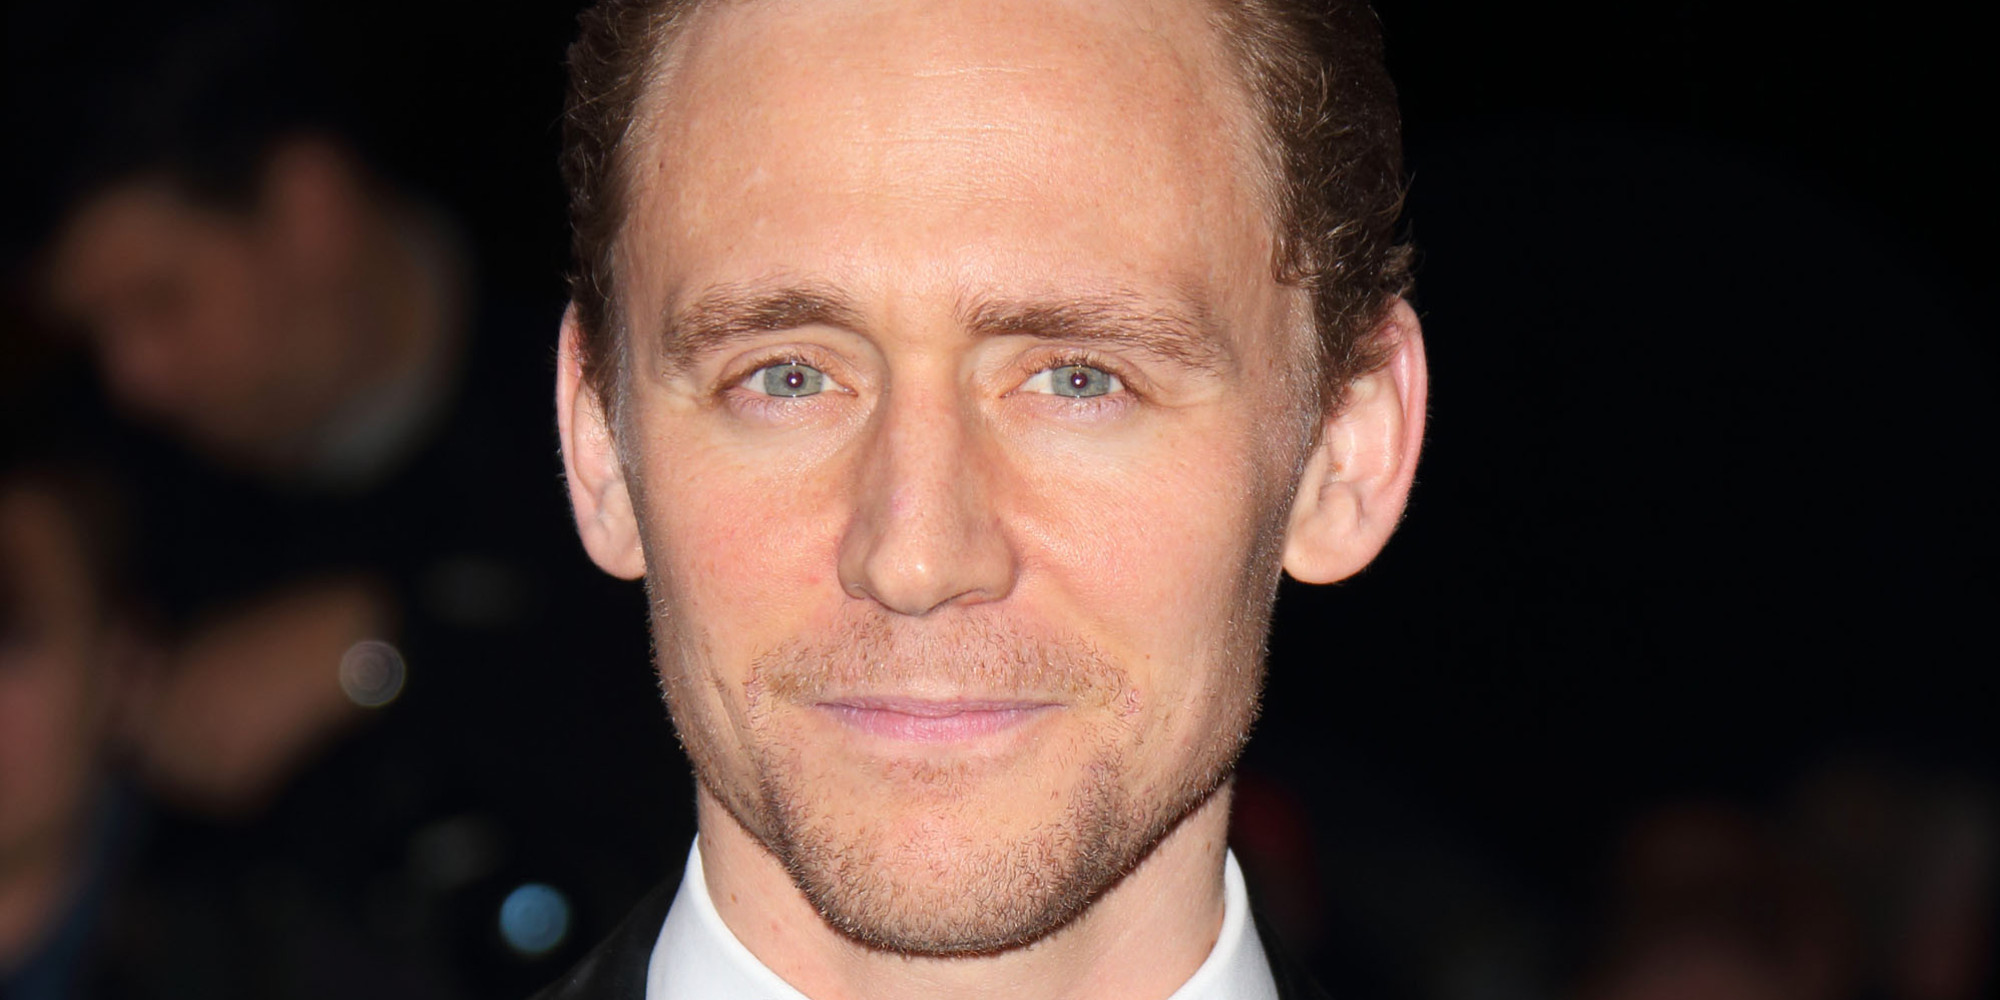 Tom hiddleston and hugh laurie star in 'the night manager'